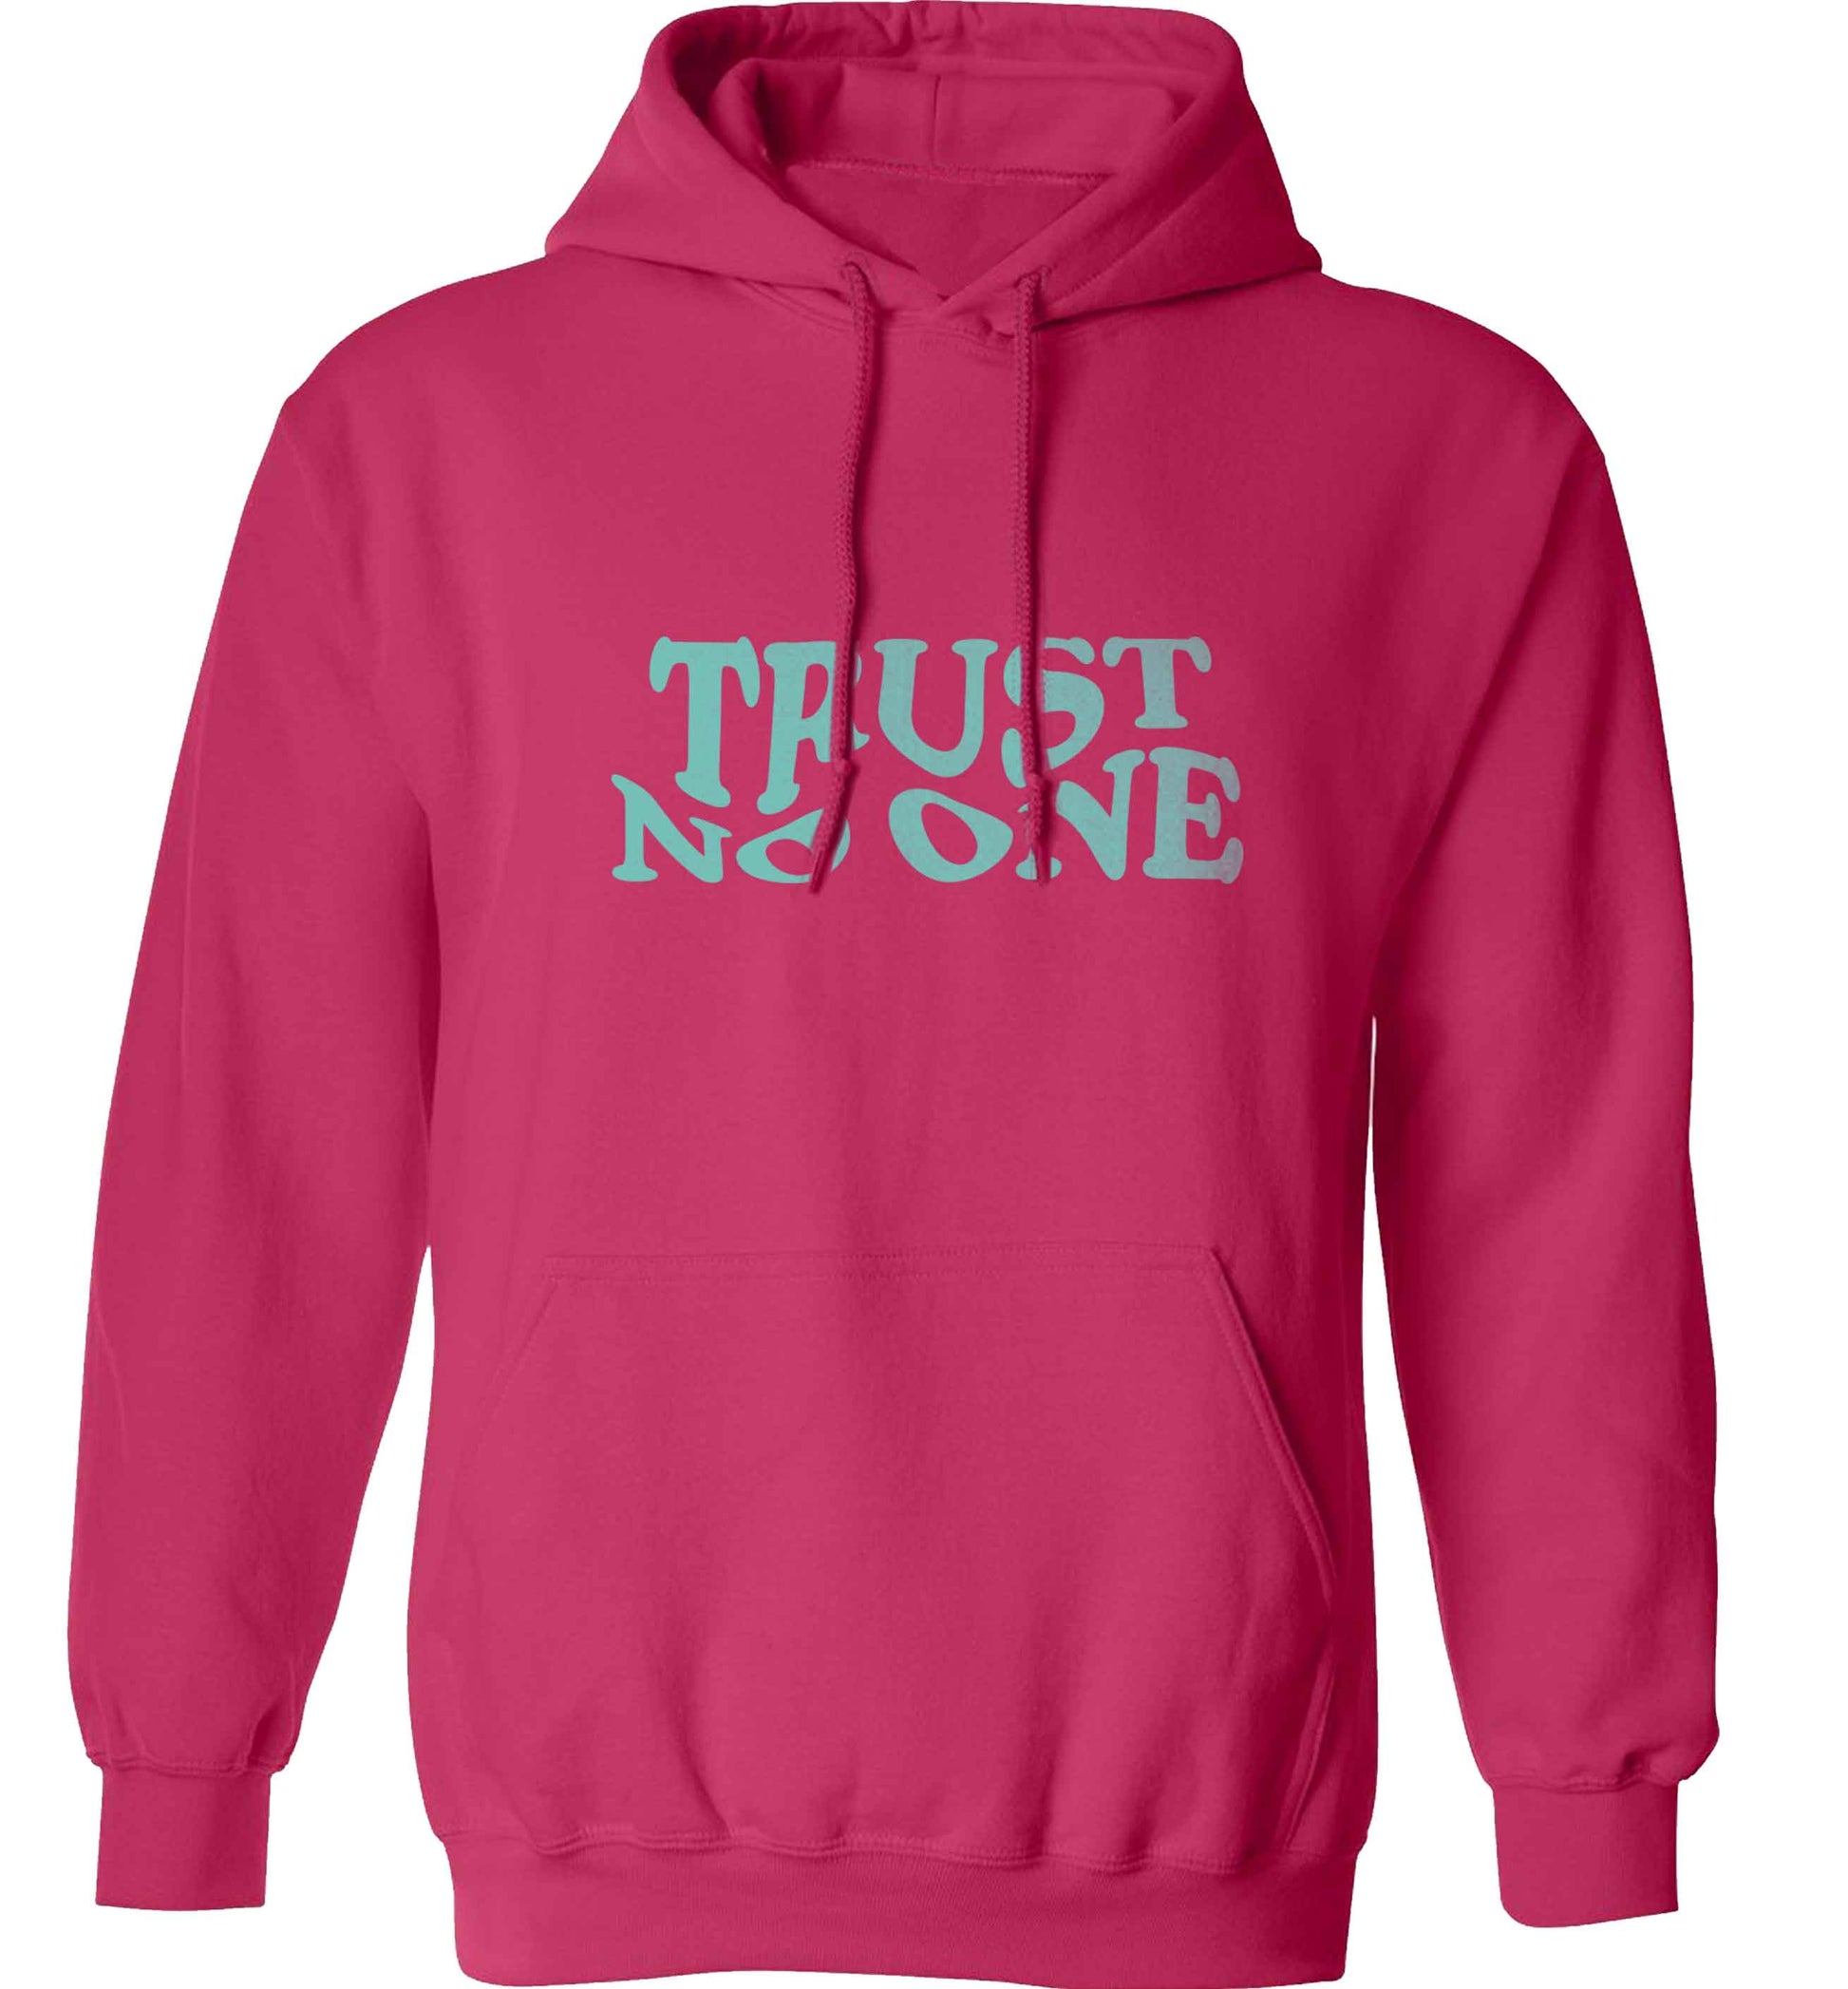 Trust no one adults unisex pink hoodie 2XL